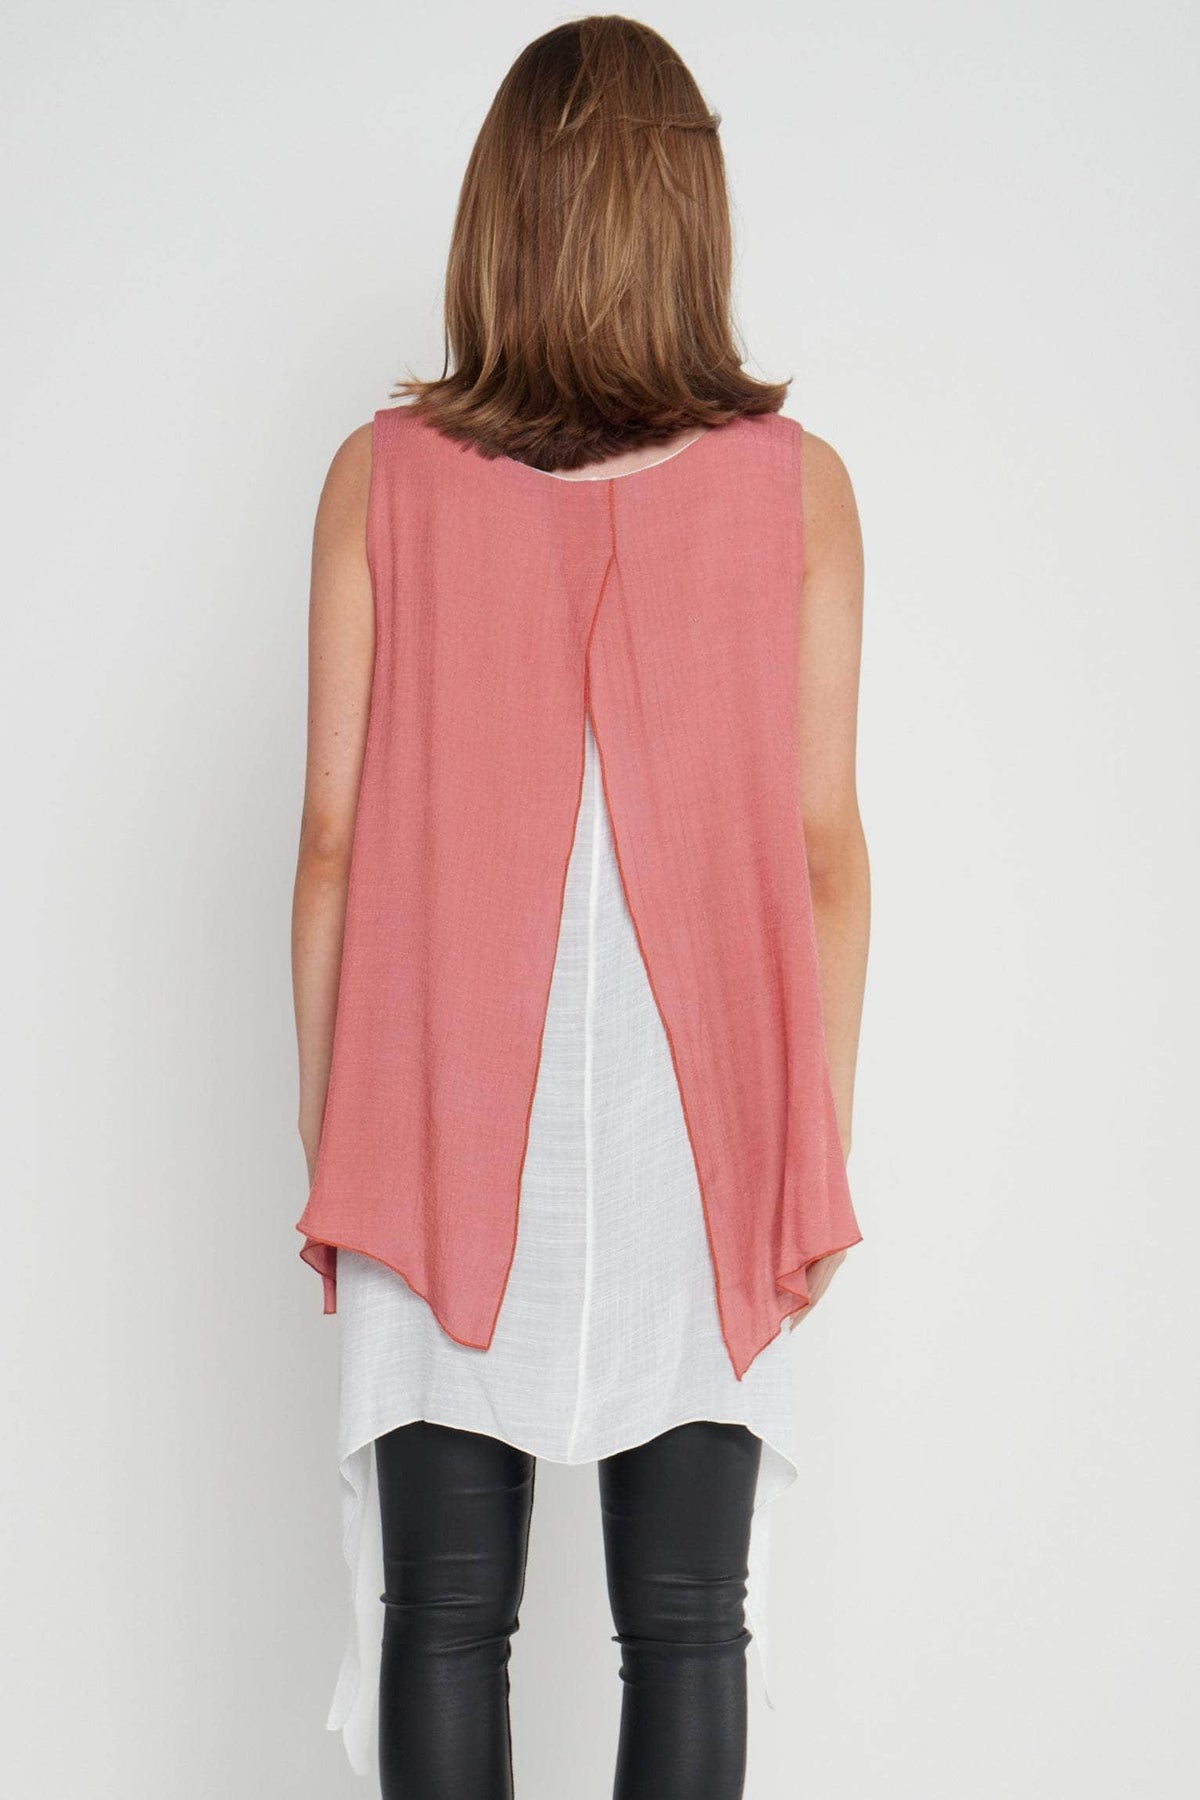 Saloos Tunic Double-Layered Tunic Top with Necklace